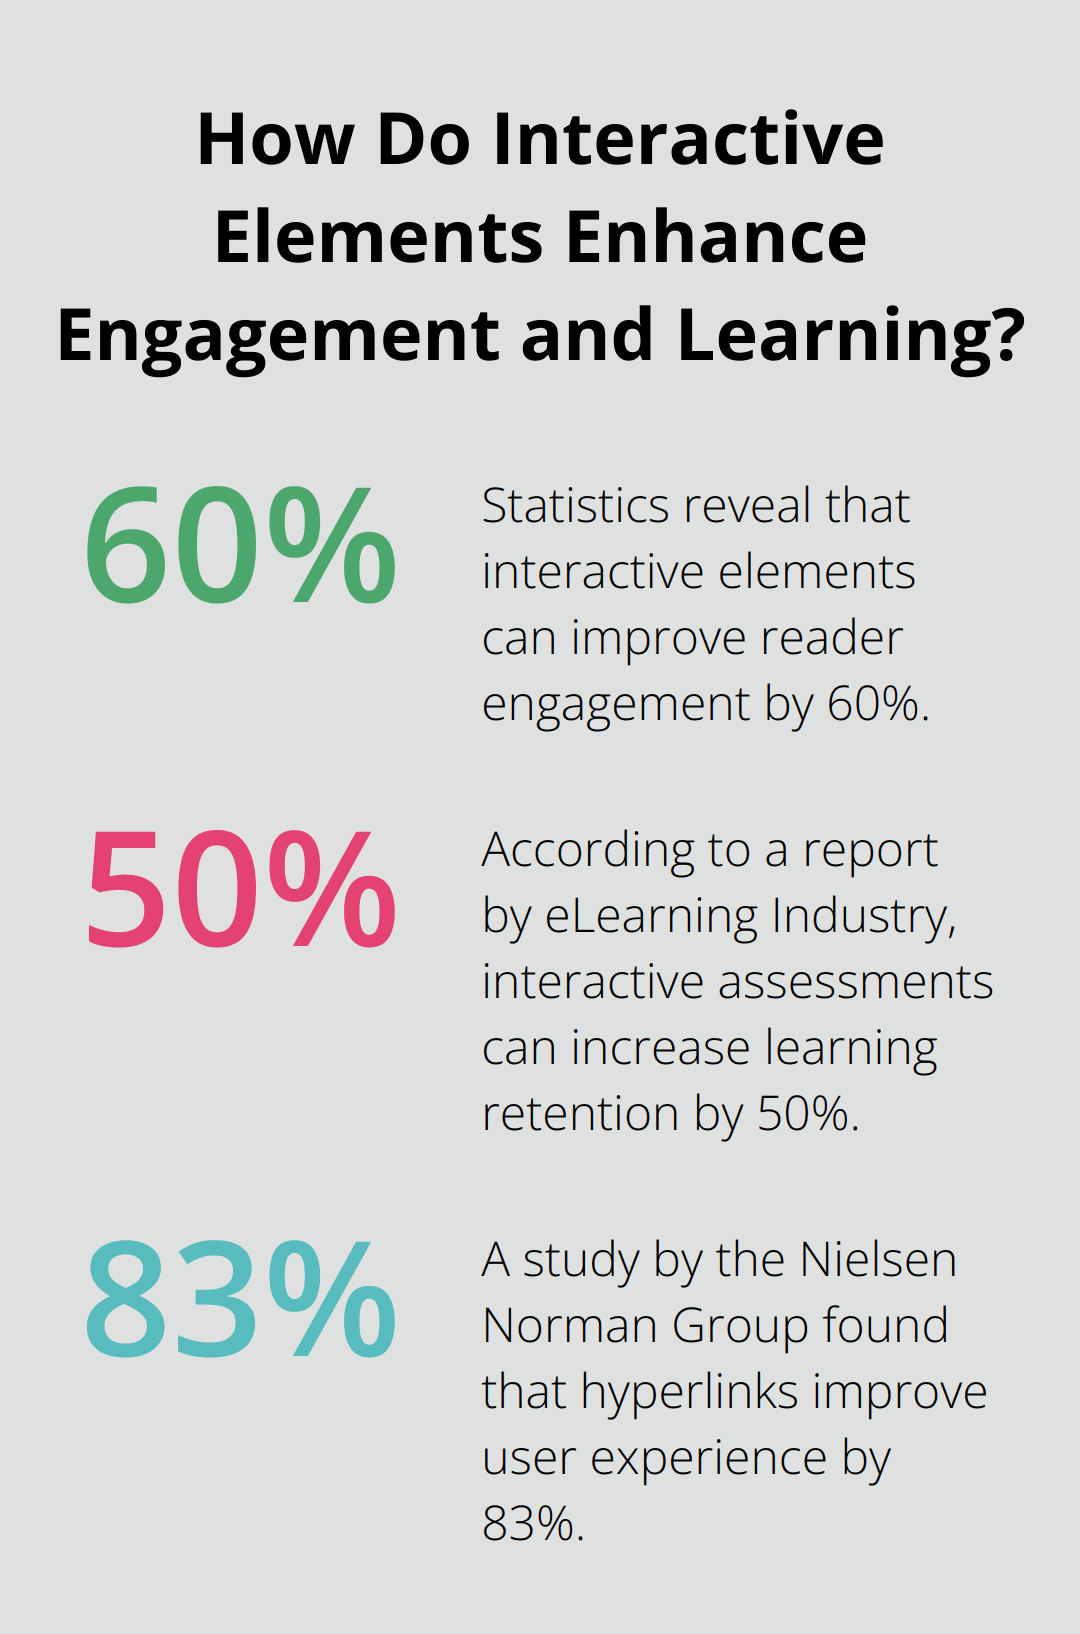 Fact - How Do Interactive Elements Enhance Engagement and Learning?